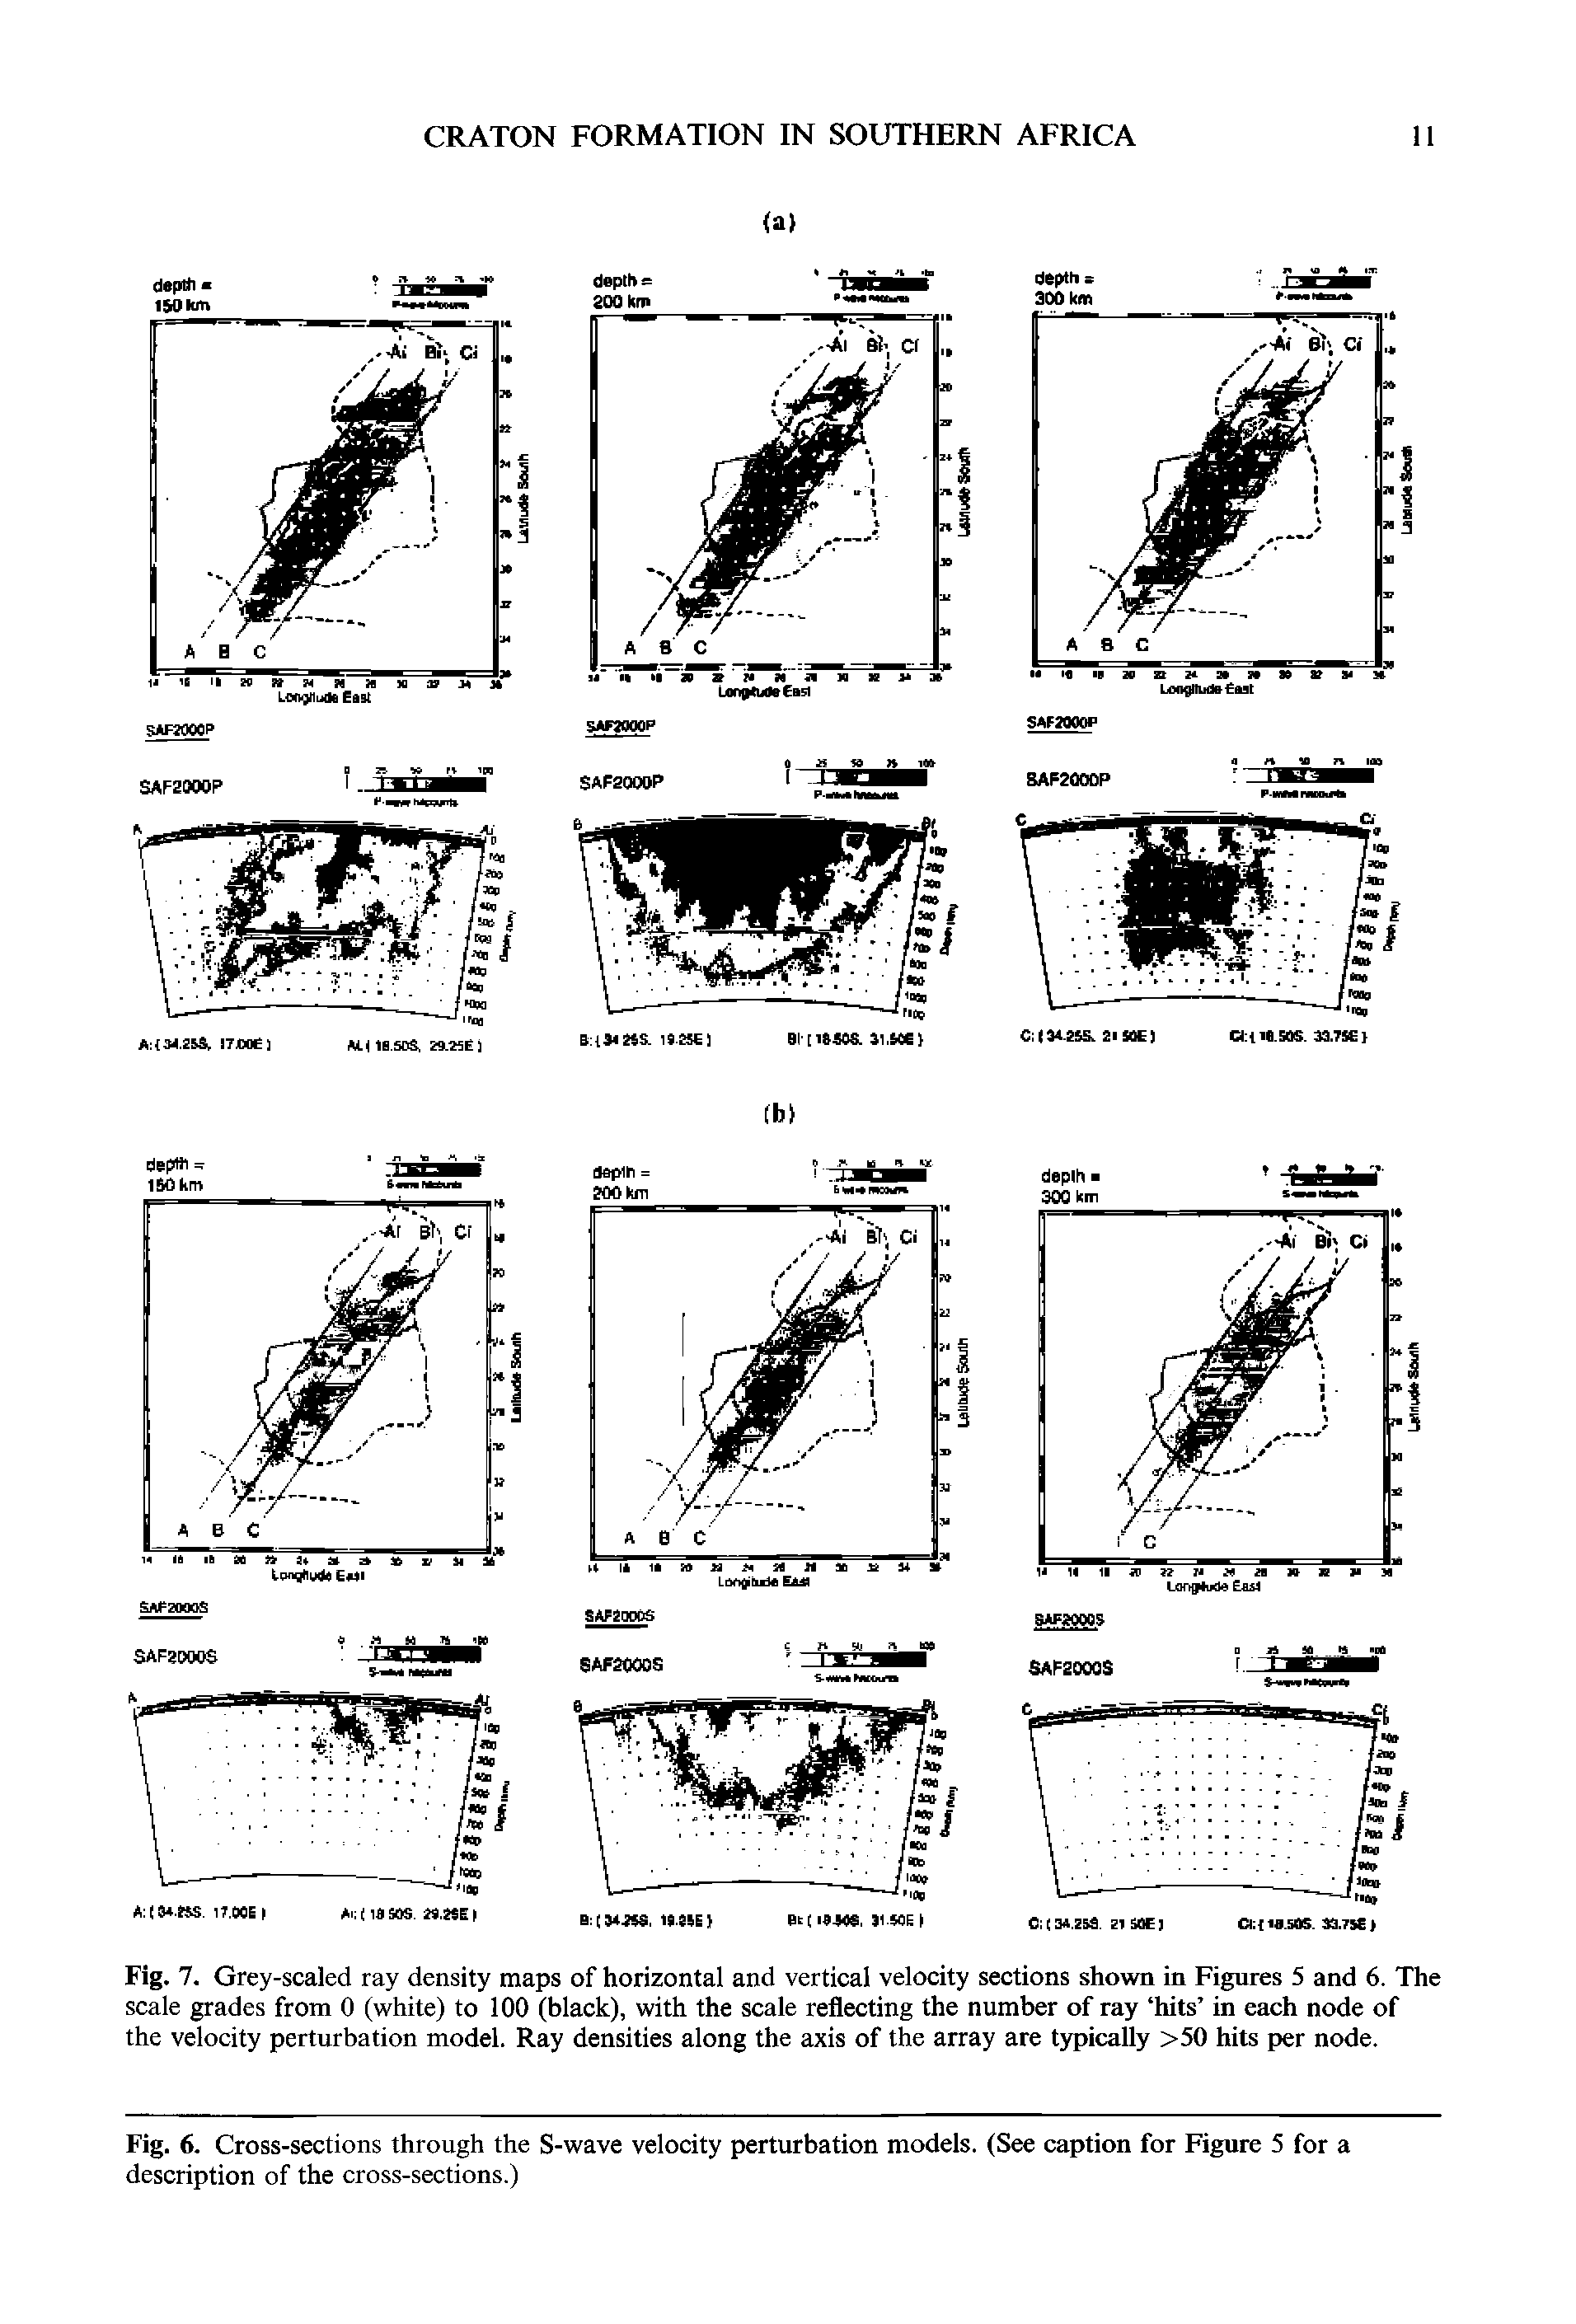 Fig. 6. Cross-sections through the S-wave velocity perturbation models. (See caption for Figure 5 for a description of the cross-sections.)...